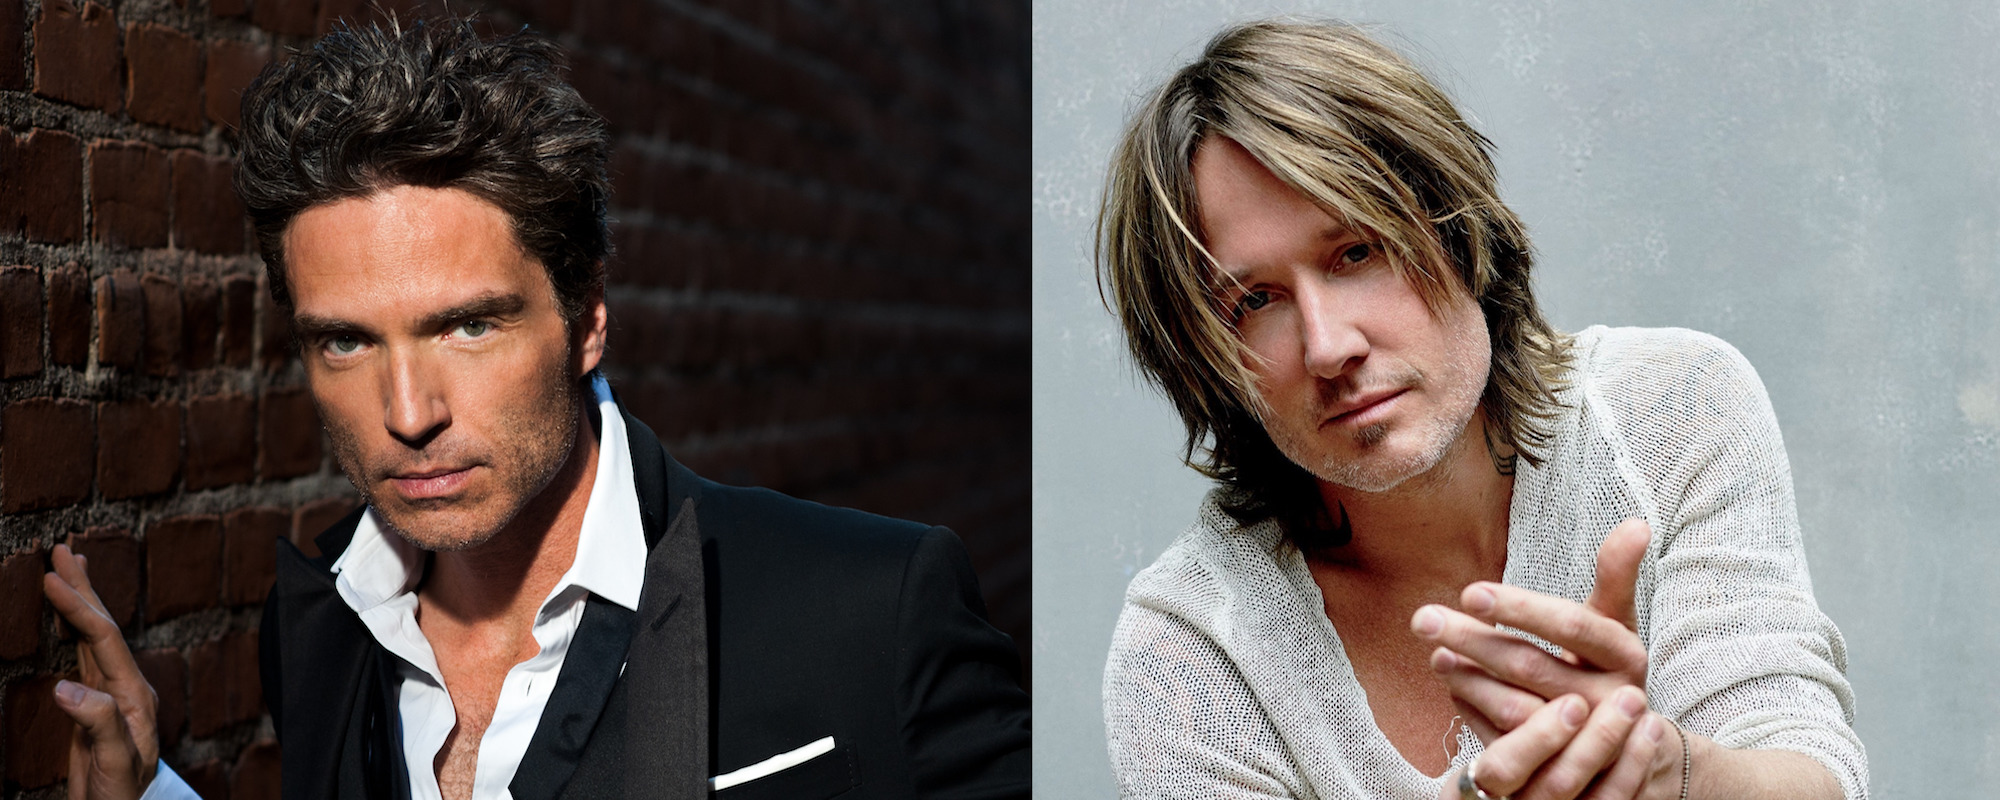 Richard Marx, Keith Urban Release Their Country Co-Write “One Day Longer”